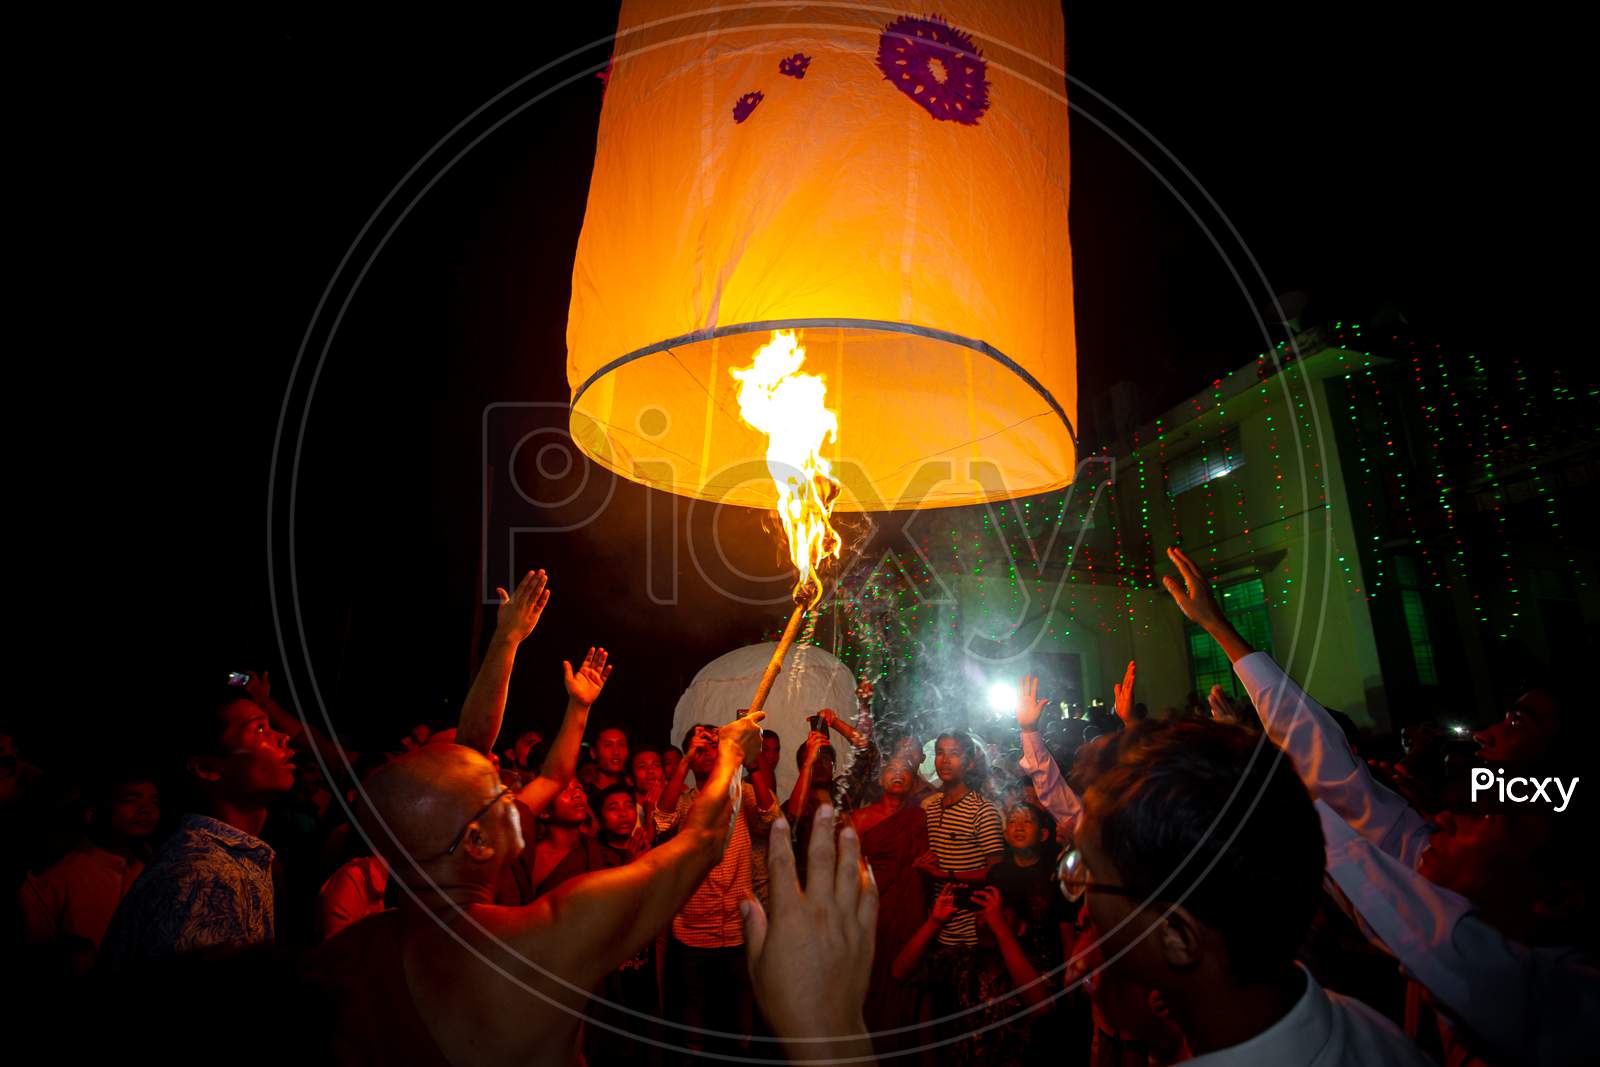 Bangladesh – October 13, 2019: A Buddhist Monk With His Disciples Trying To Fly A Paper Lantern At Ujani Para Buddhist Temple In Bandarban, Bangladesh.